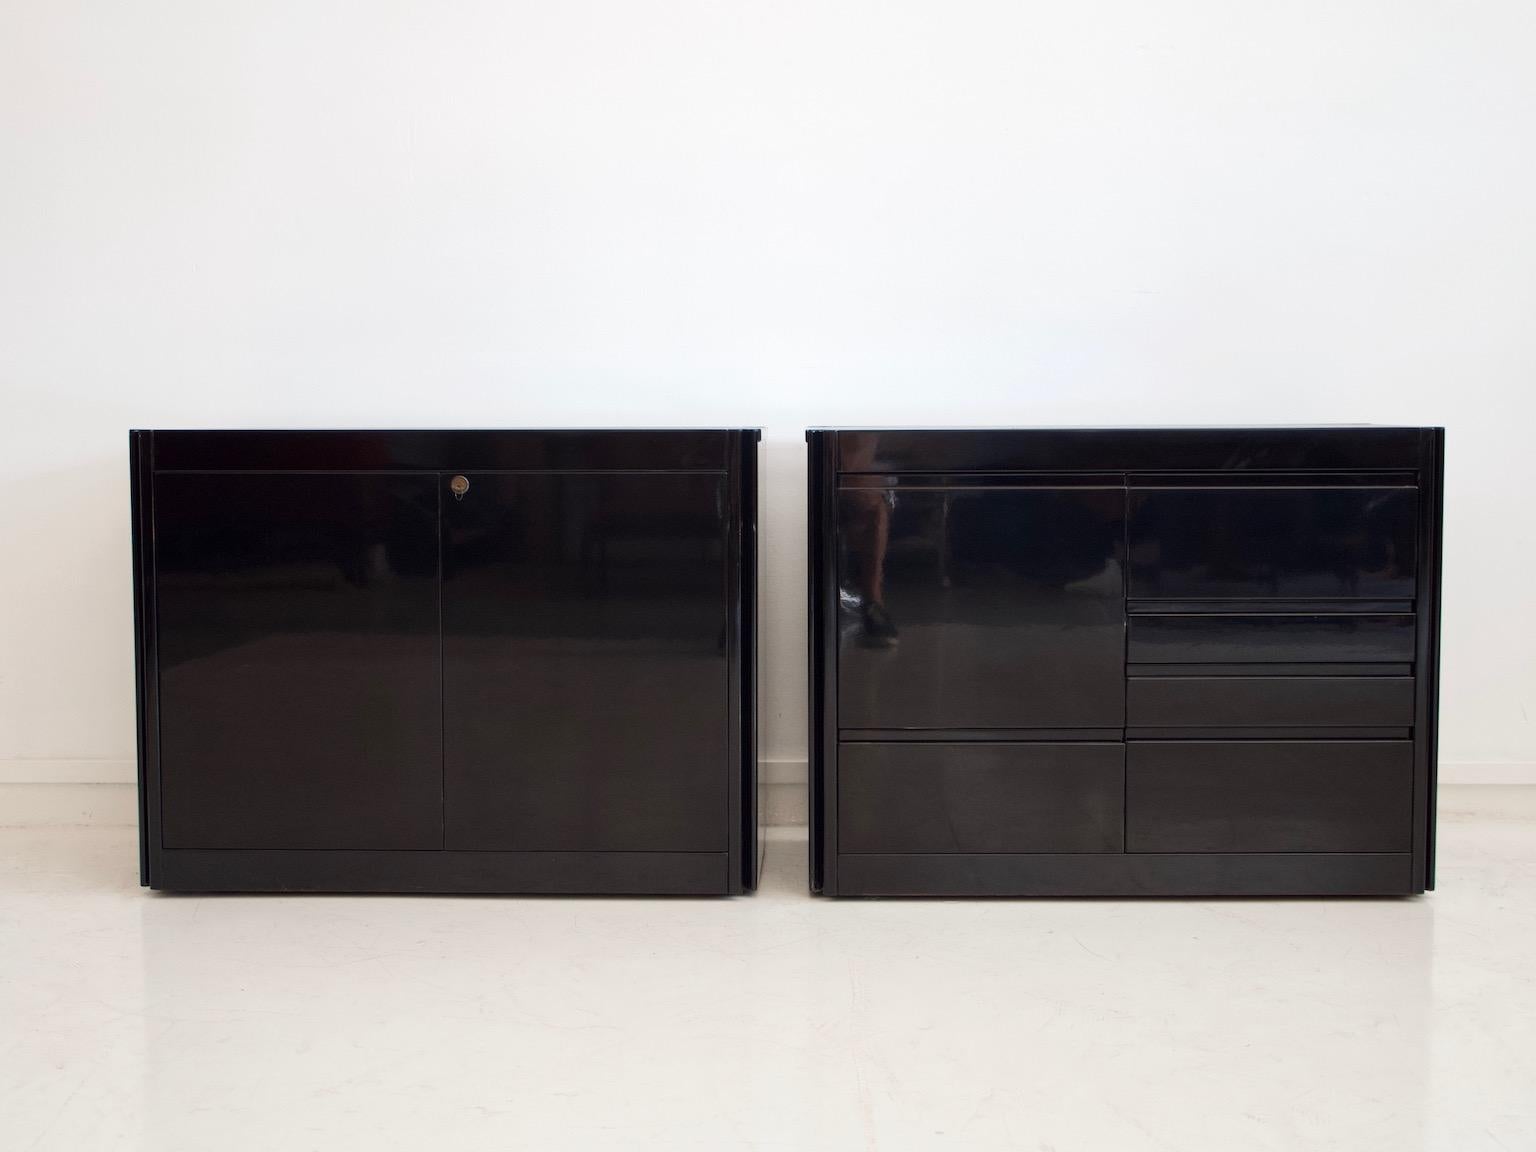 Pair of laminated wood credenzas with marble top, designed by Angelo Mangiarotti. Produced by Tisettanta in the 1970s. One of them with drawers, the other one with shelves behind two doors. The sideboards have been restored and lacquered in black.